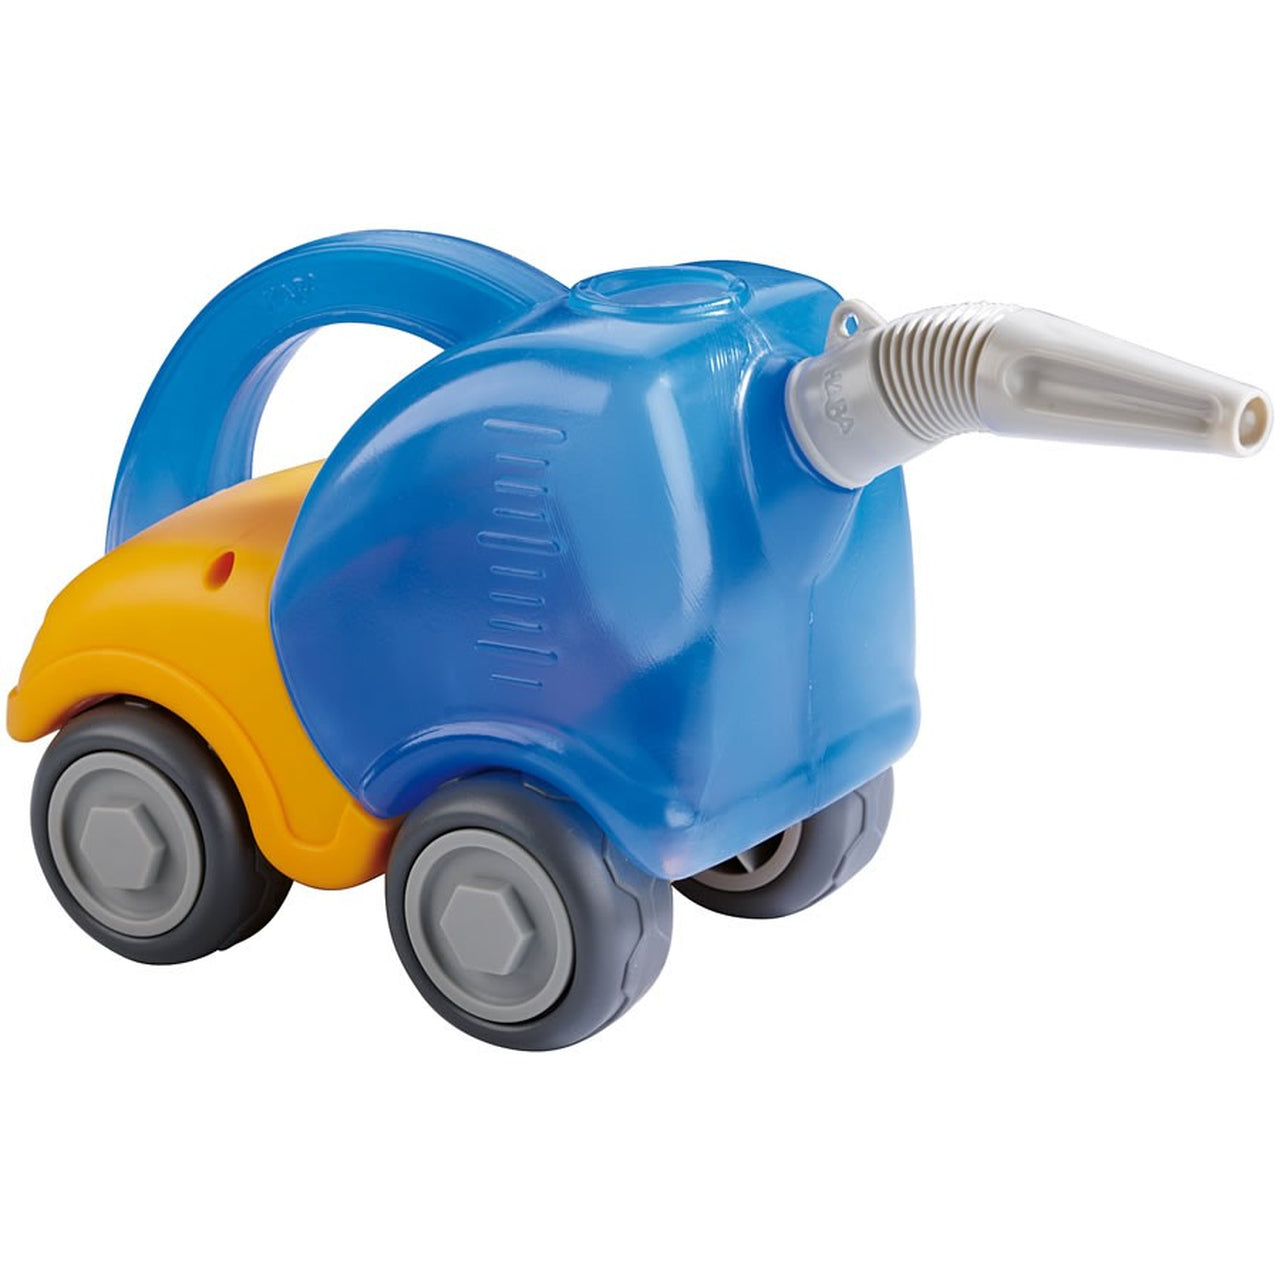 HABA Sand Play Tanker Truck with Funnel